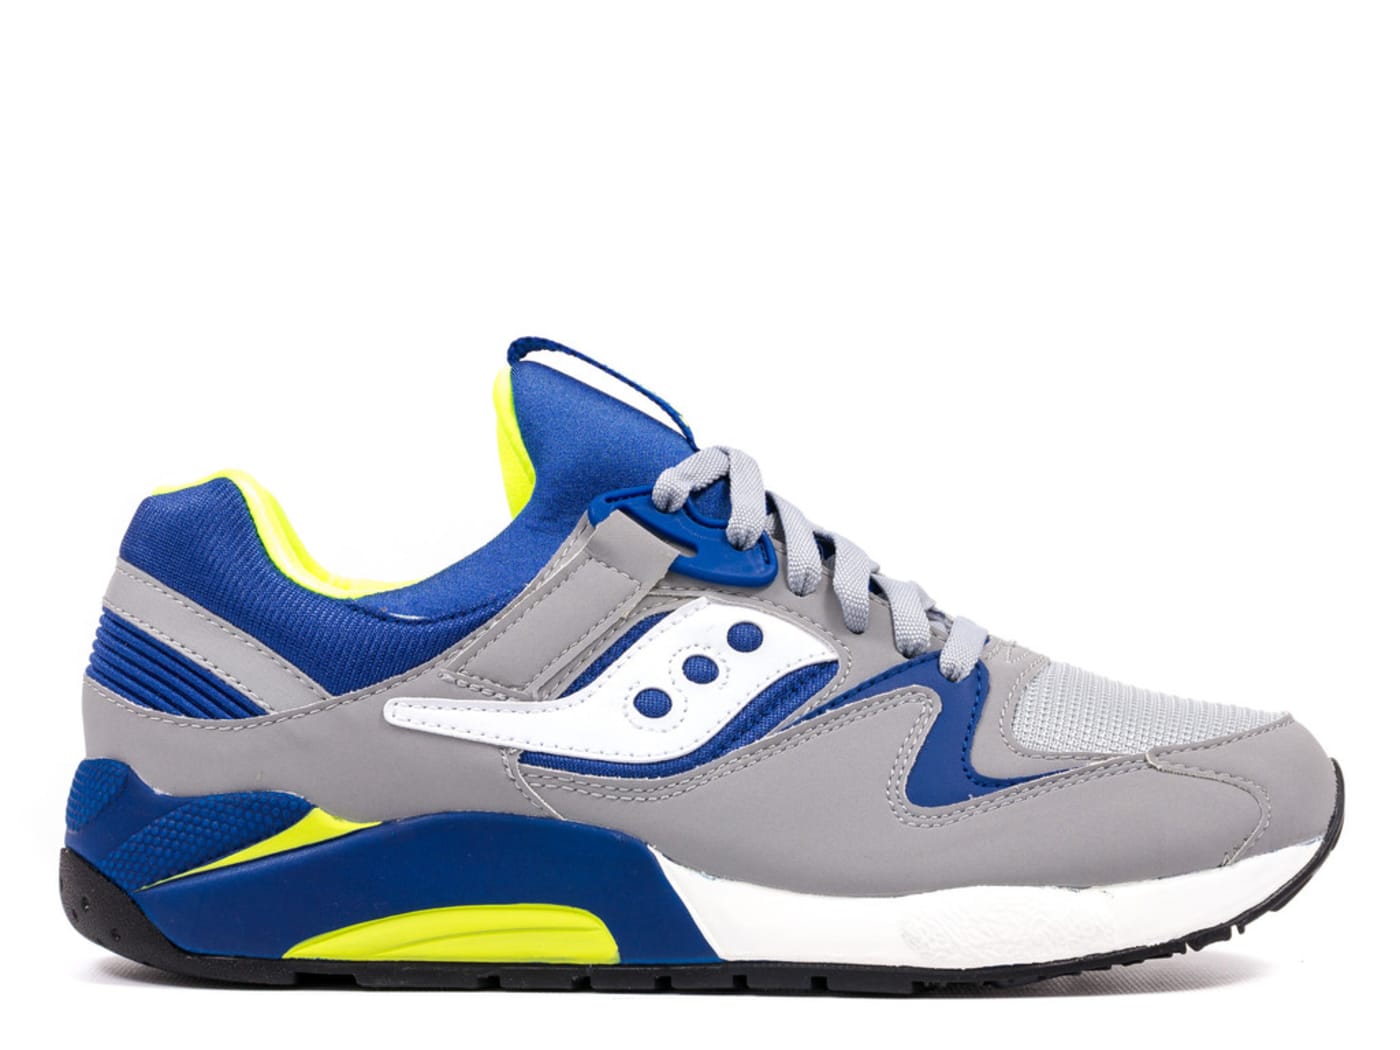 Kicks of the Day: Saucony Grid 9000 “Grey/Blue/Neon” | Complex